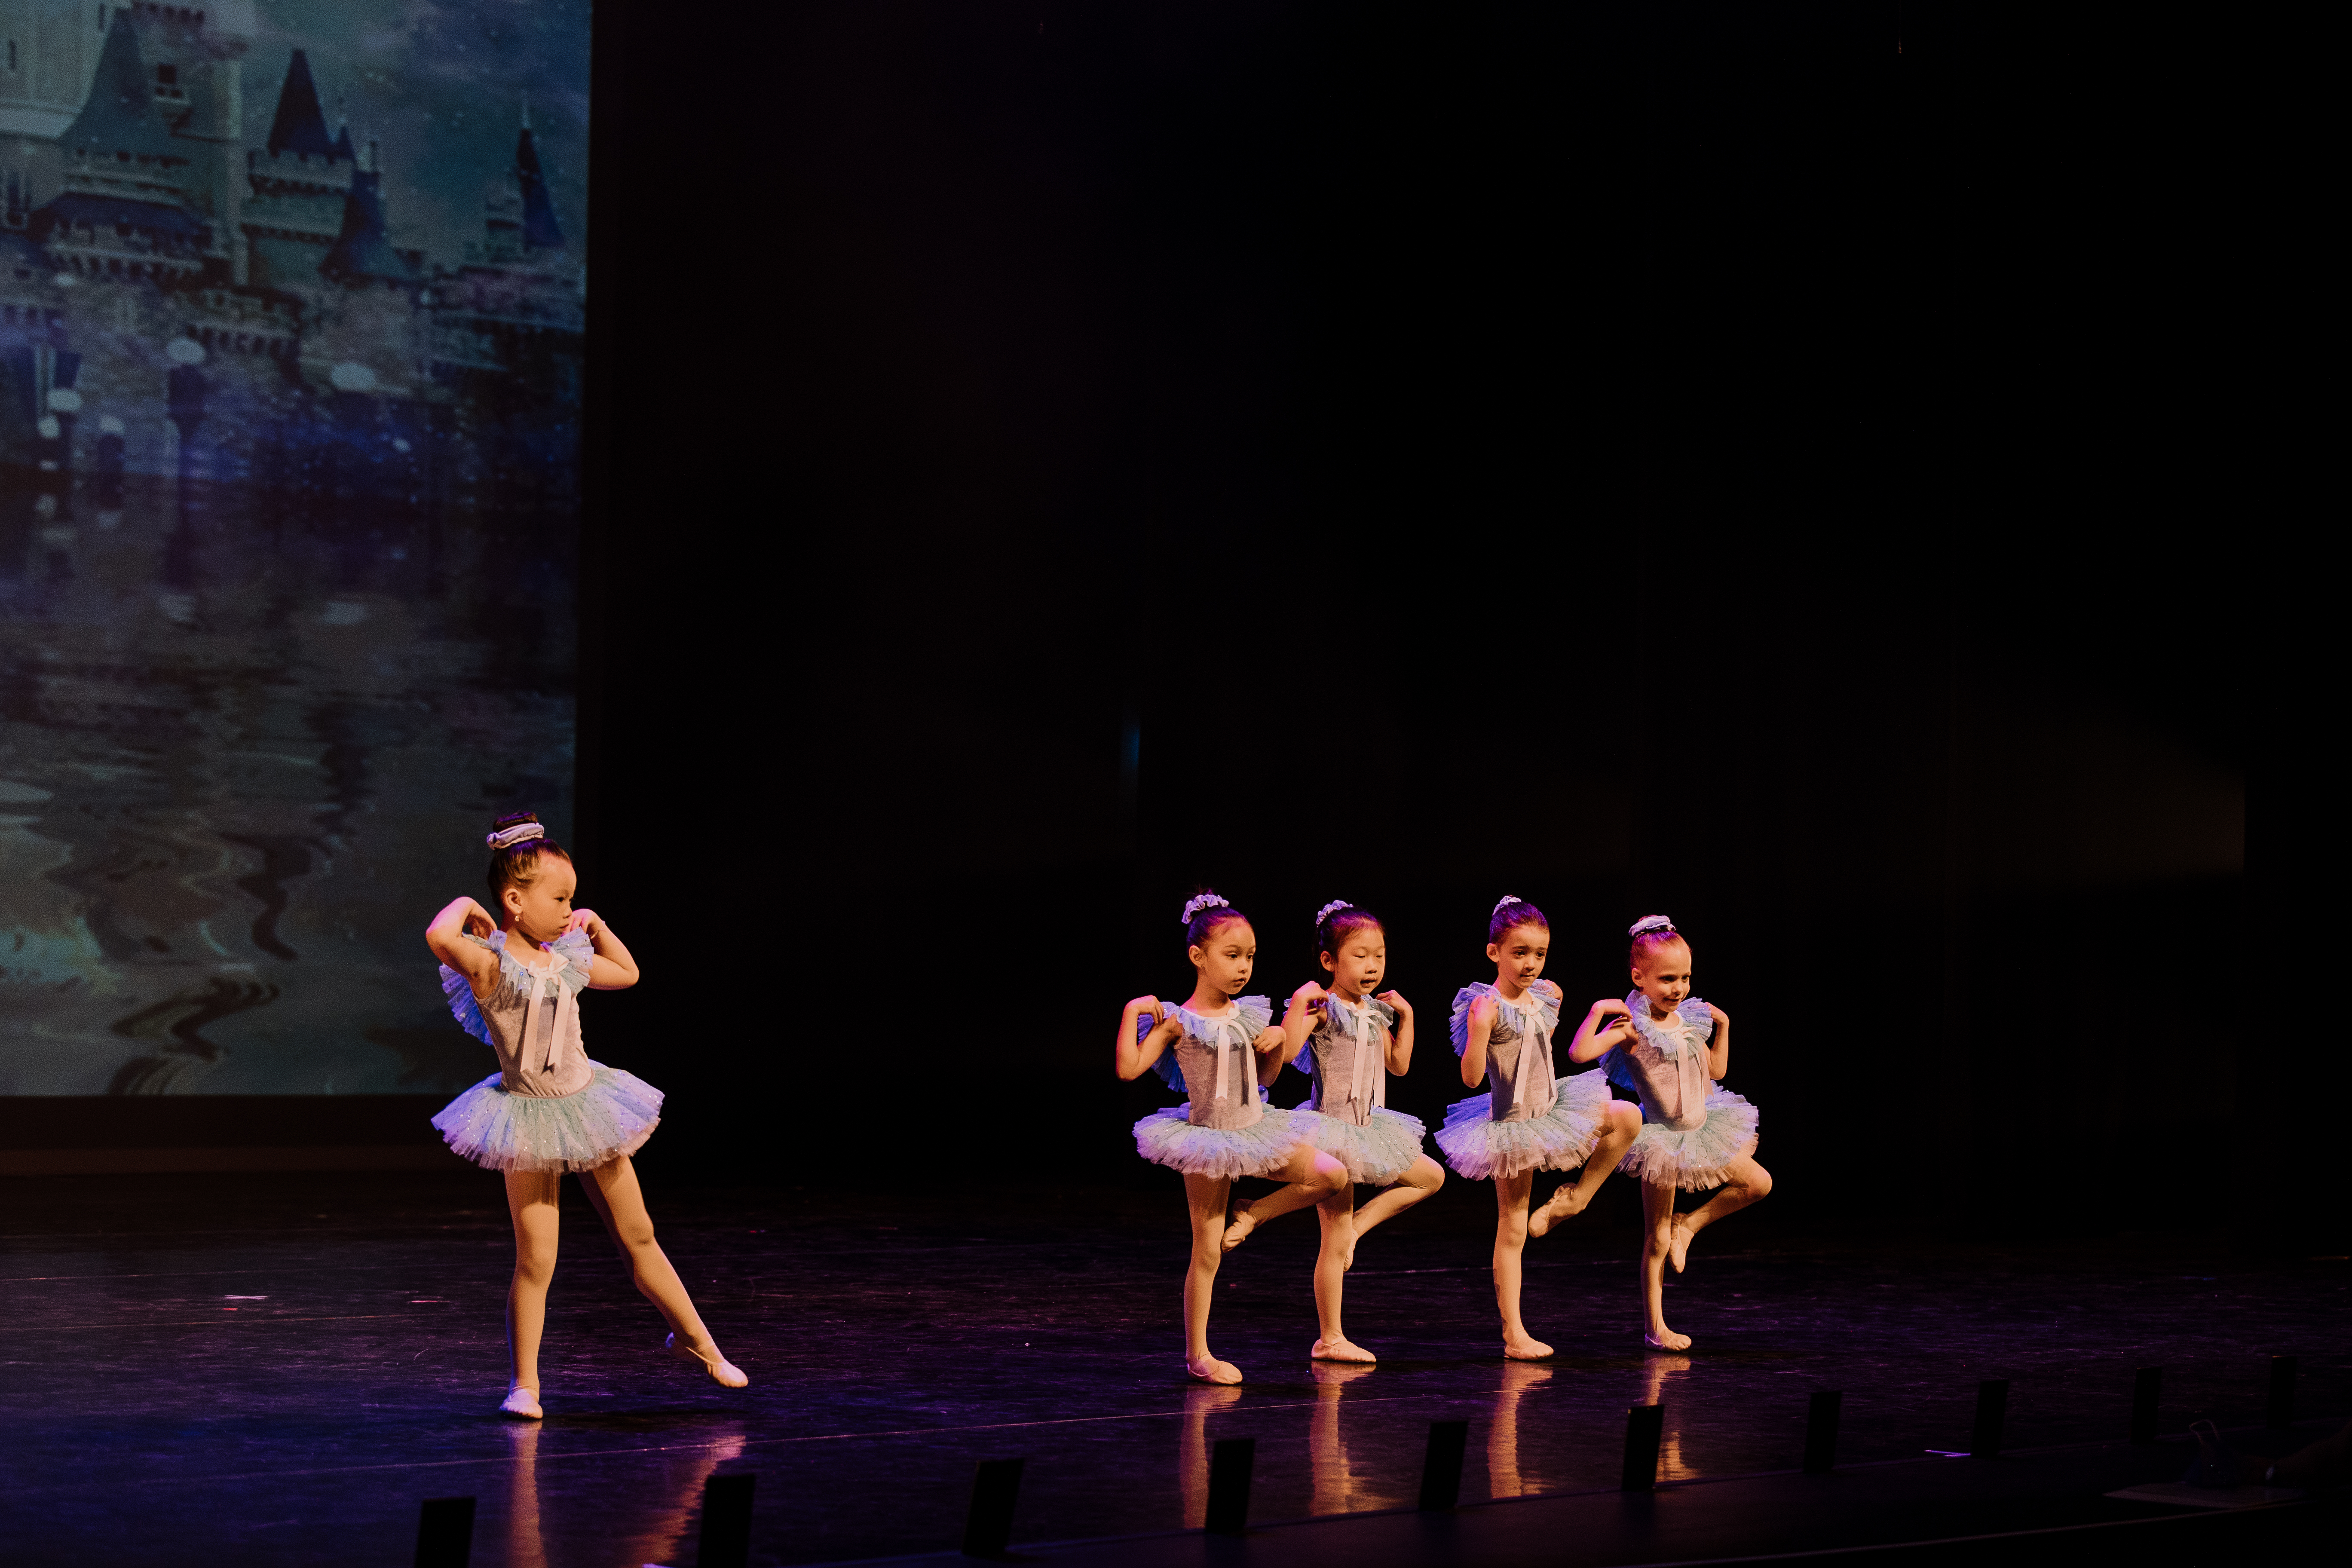 Five dancers performing a ballet routine on stage in blue tutus